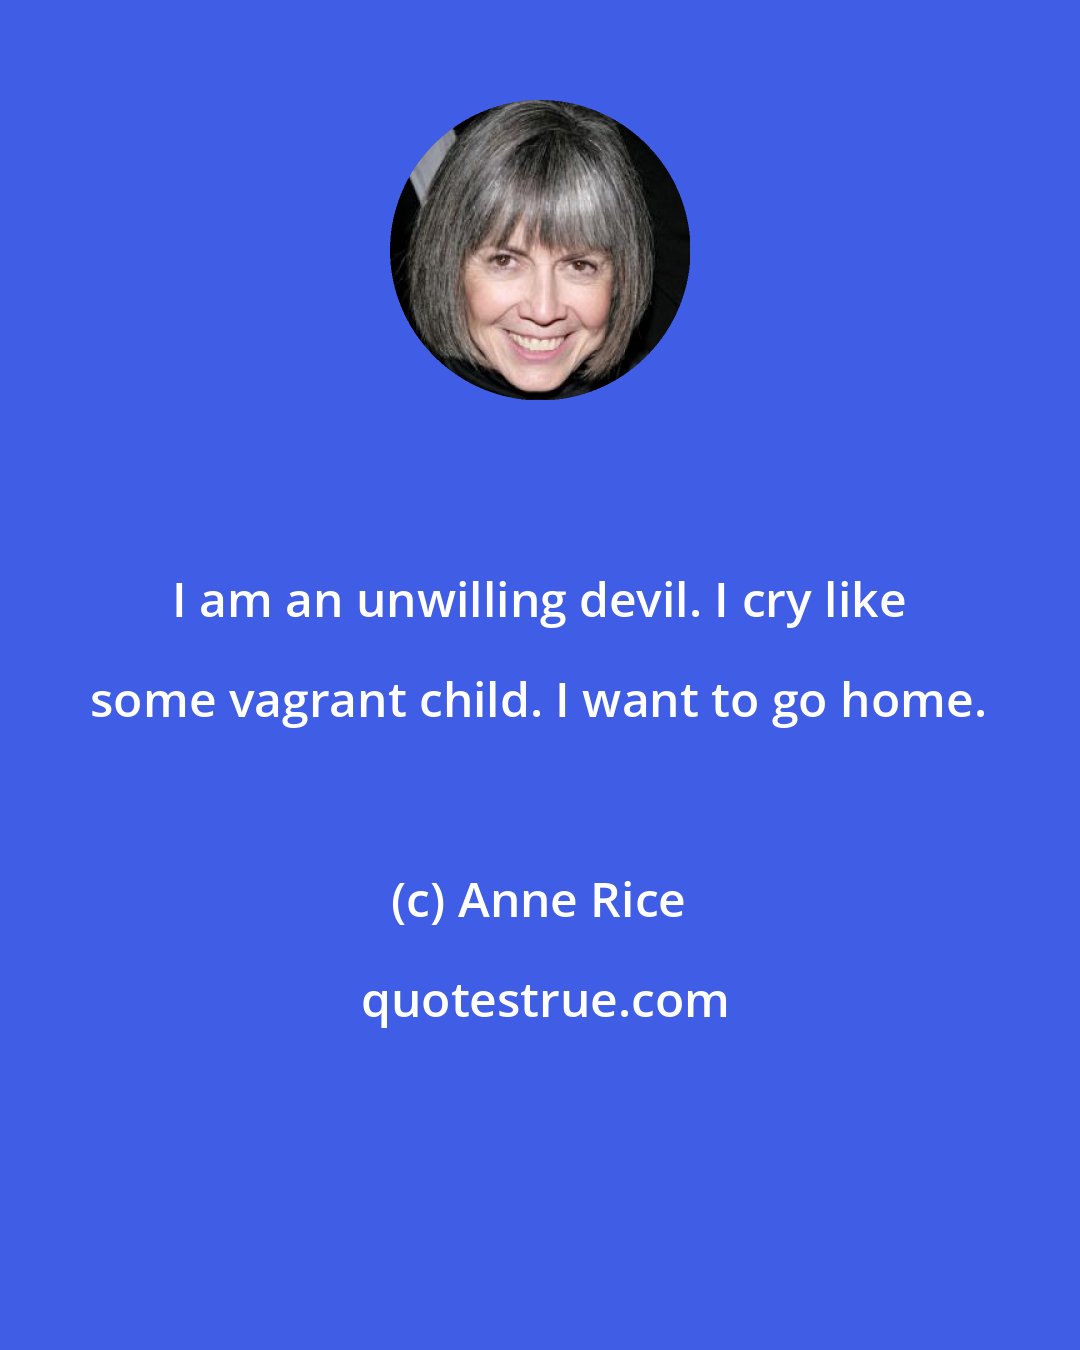 Anne Rice: I am an unwilling devil. I cry like some vagrant child. I want to go home.